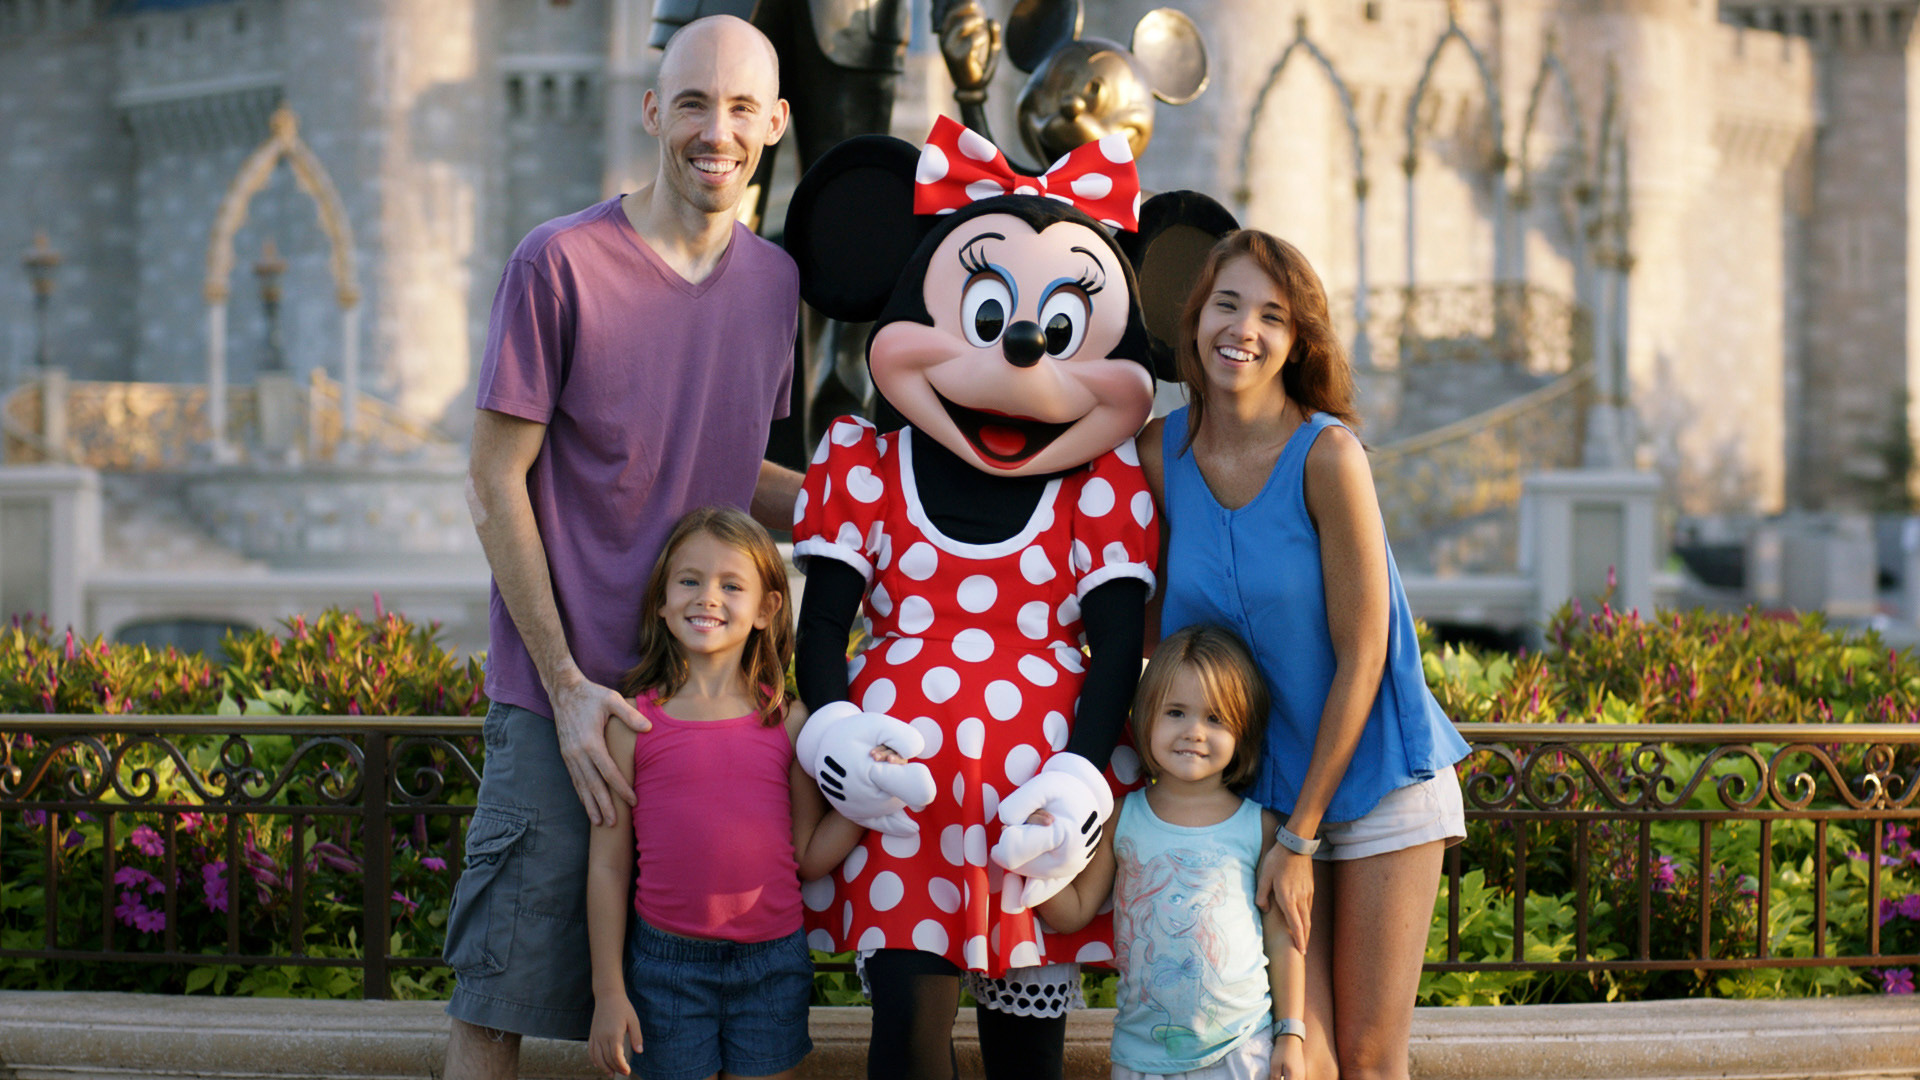 The Hall’s Unforgettable spot for Disney featuring the Mansfield family